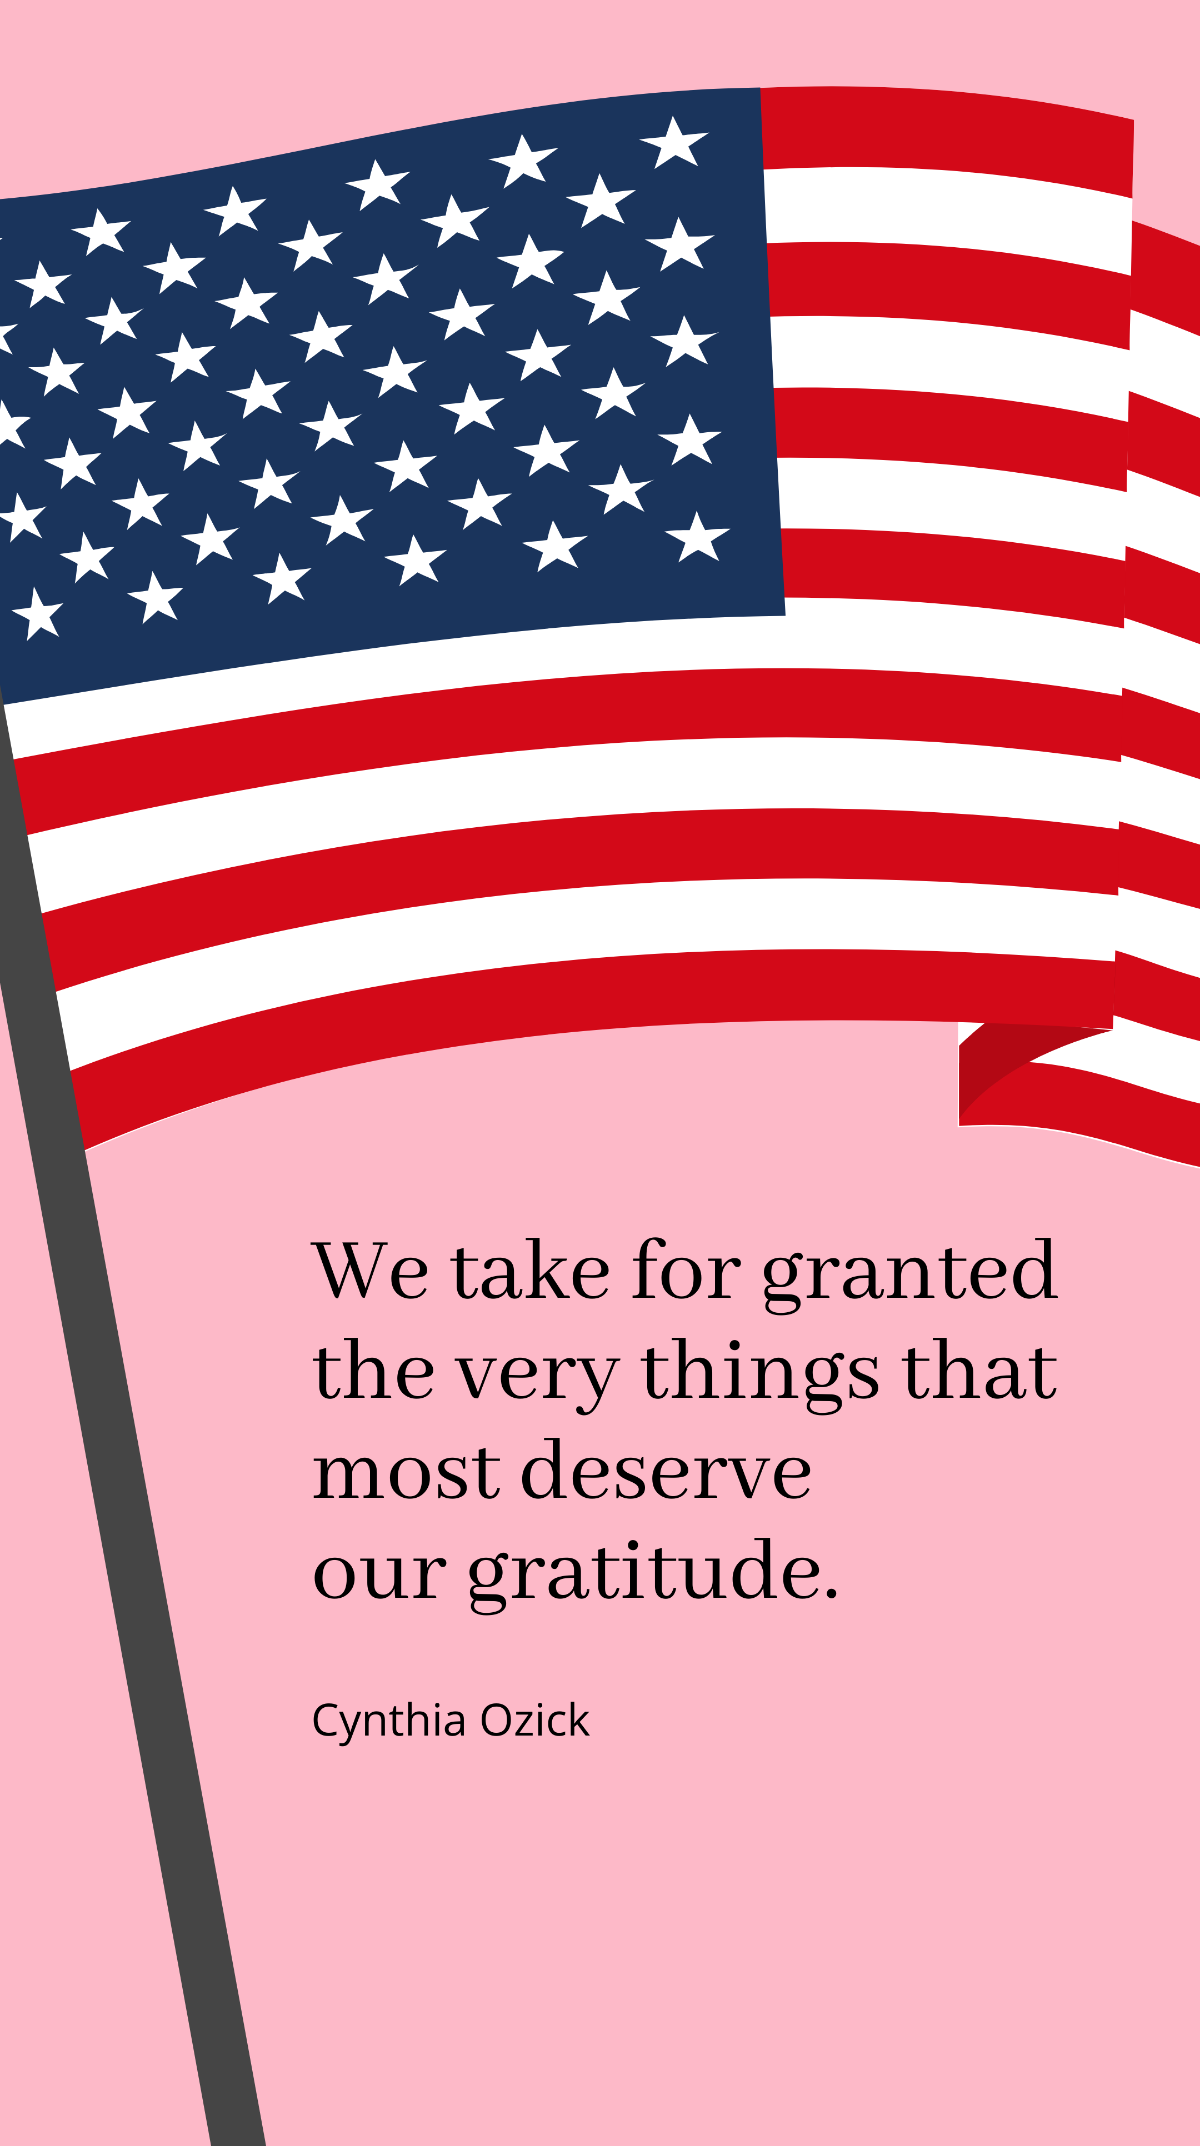 Free Cynthia Ozick - We take for granted the very things that most deserve our gratitude Template